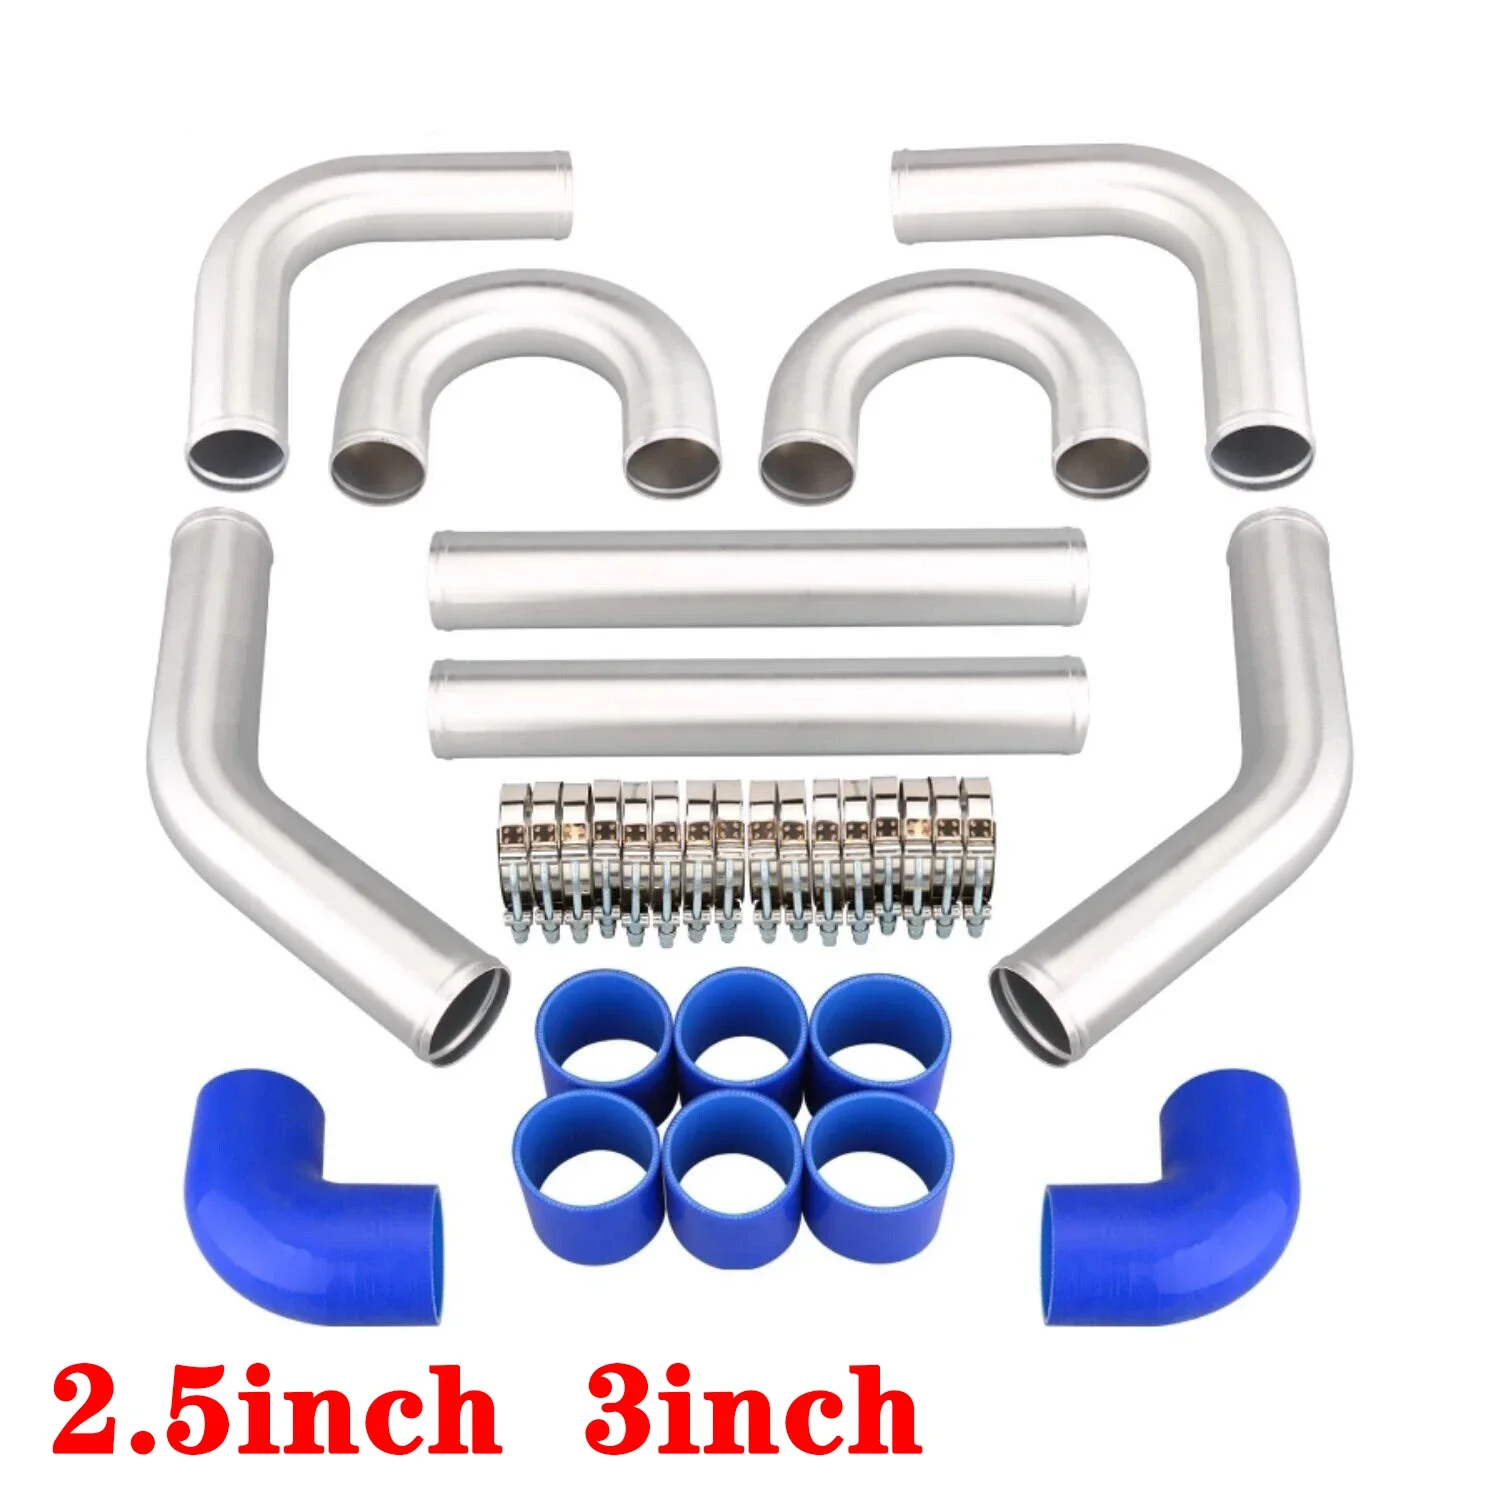 

2.5" INCH OD 63 mm/3" INCH OD 76 mm ALUMINUM TURBO INTERCOOLER PIPING KIT/ PIPES / CLAMP/ COUPLER/ UNIVERSAL